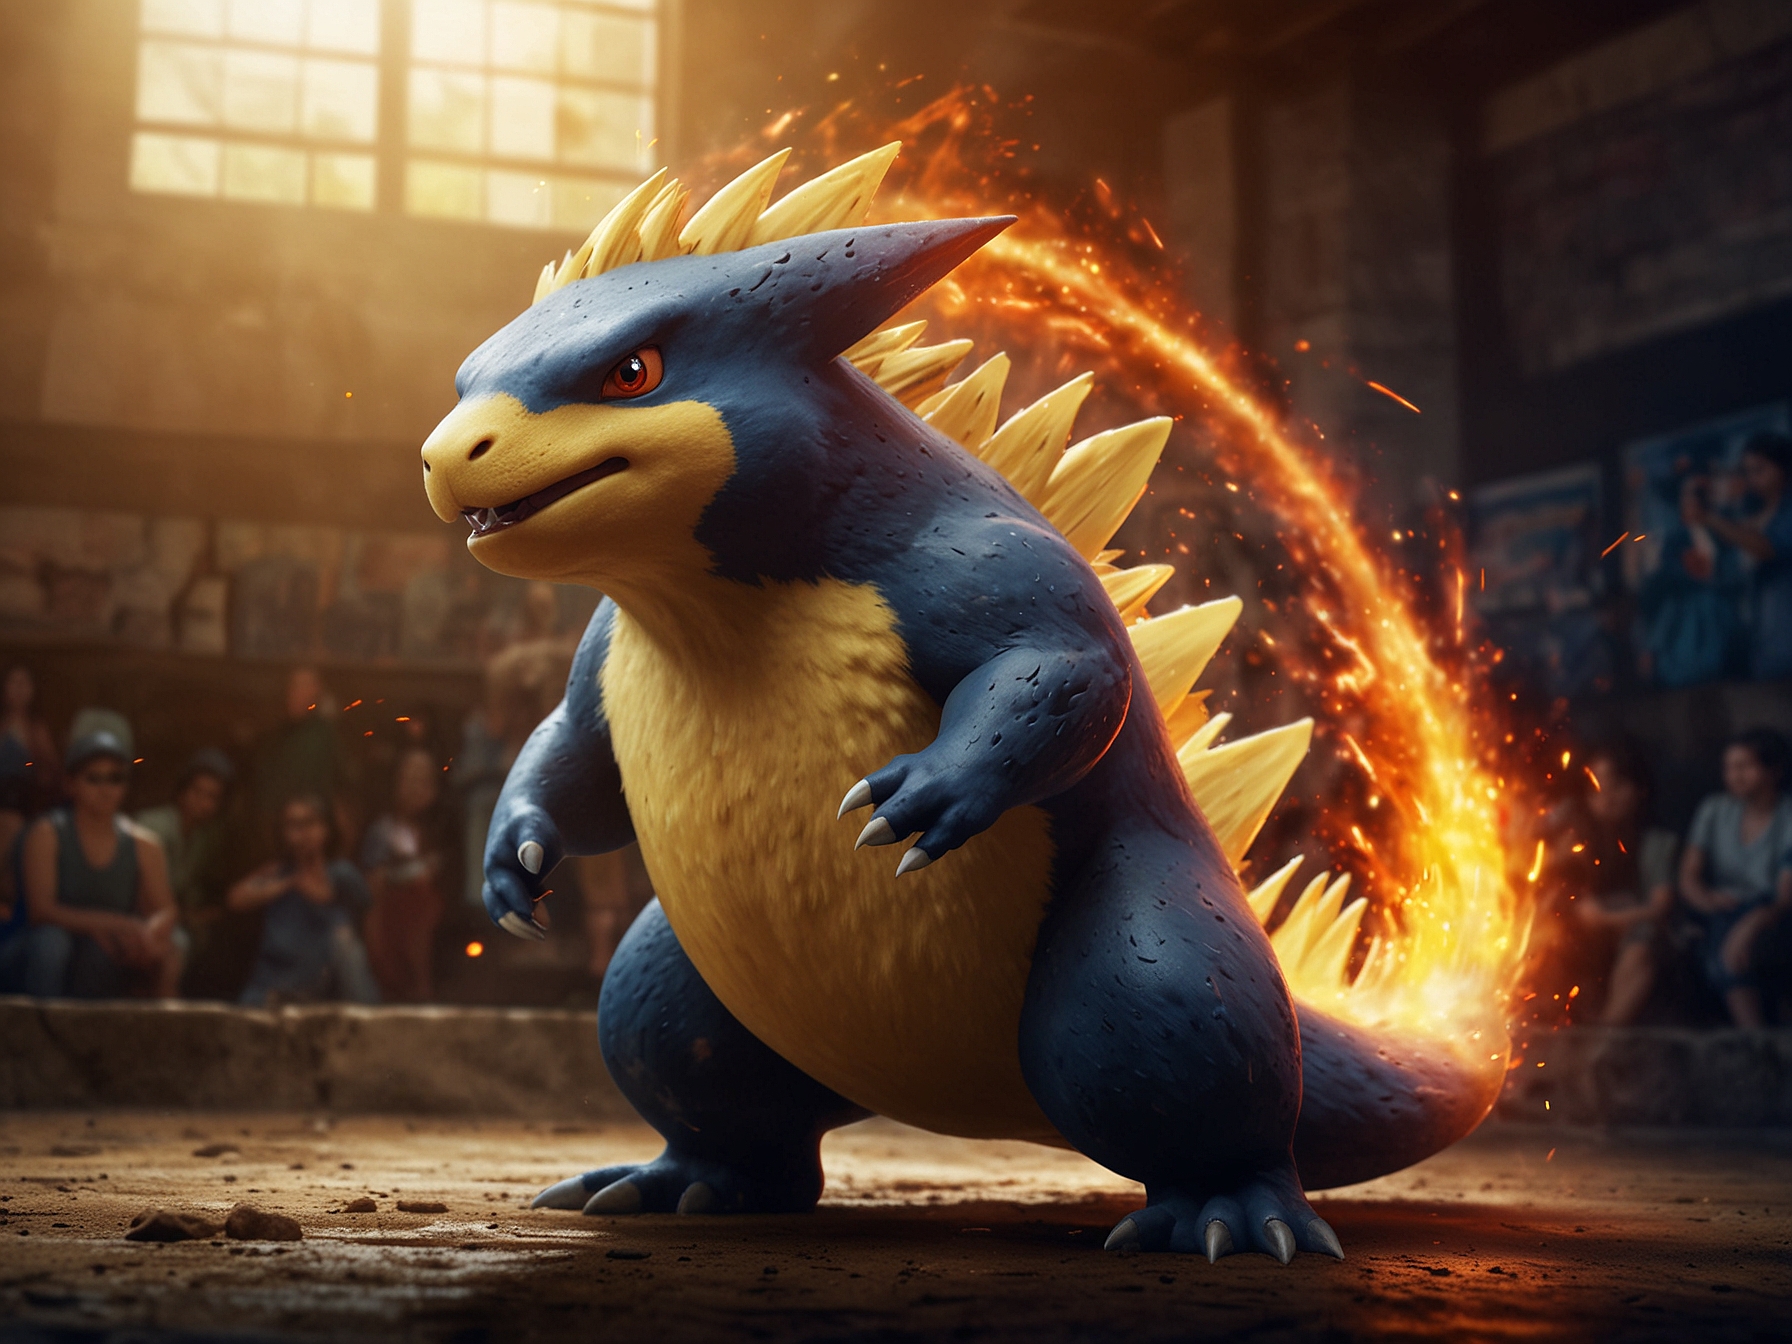 A powerful Typhlosion, evolved from Cyndaquil during the event, executing its exclusive move in a battle scene. The background displays an intense Pokémon battle arena filled with dynamic action.